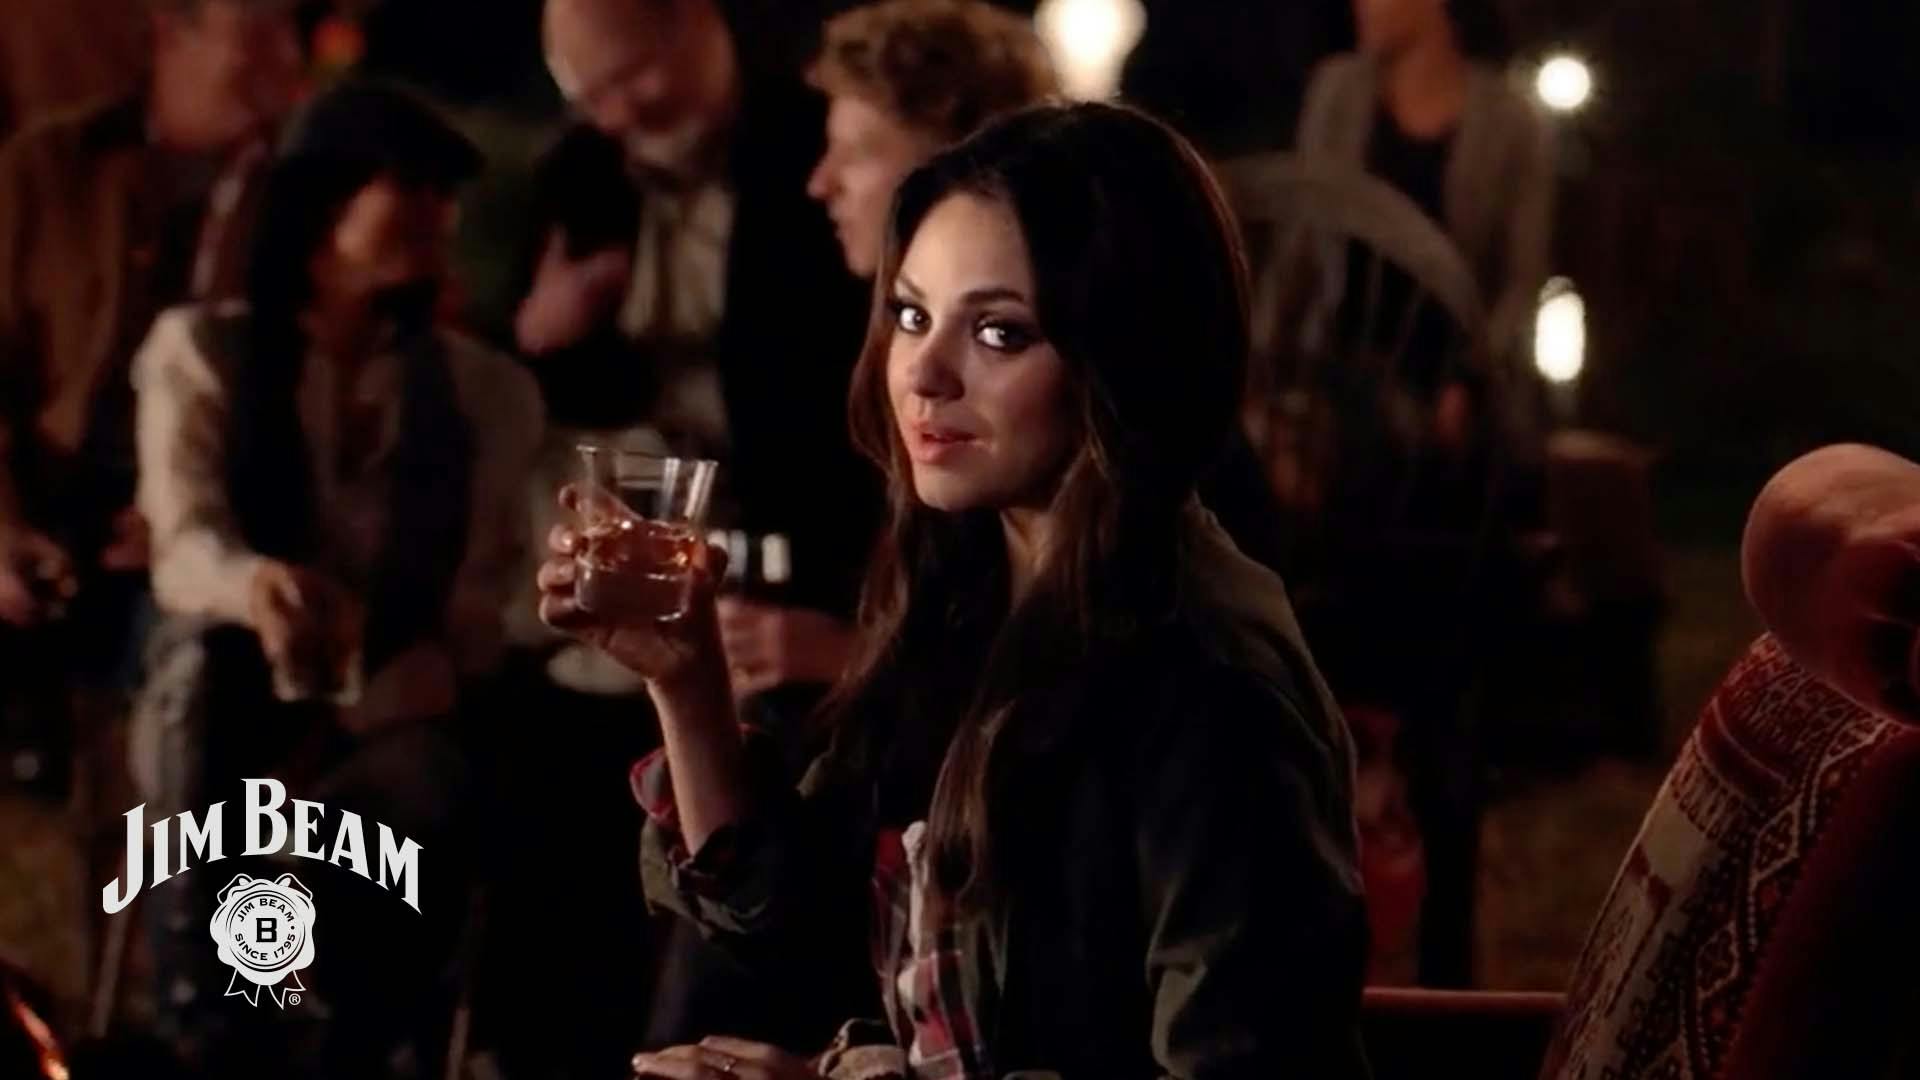 Actress Mila Kunis savors a glass of Jim Beam whiskey in a crowded room.